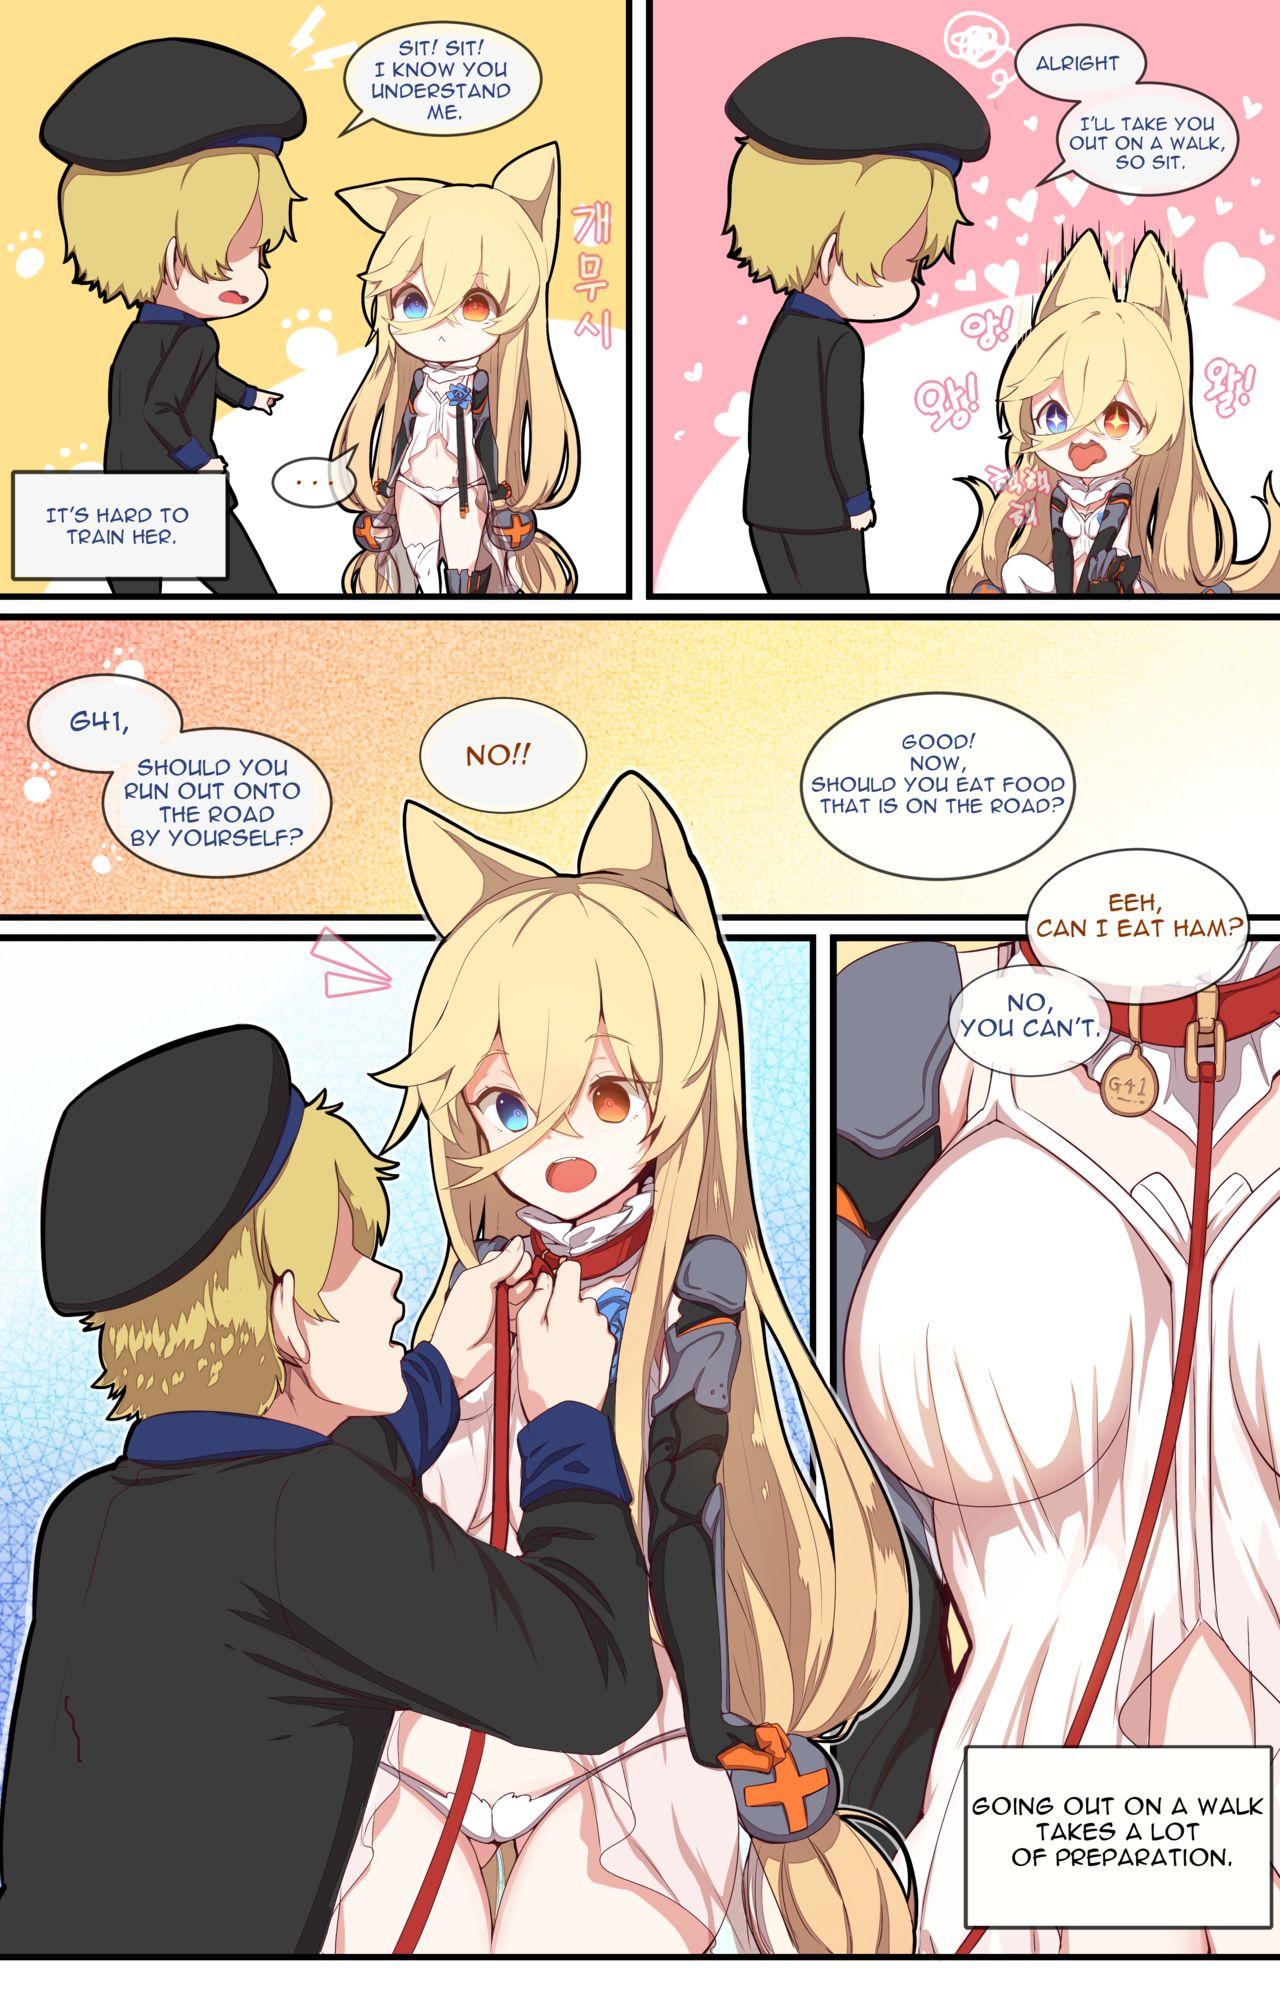 Swing How to Use Dolls 04 - Girls frontline Gay Clinic - Page 3